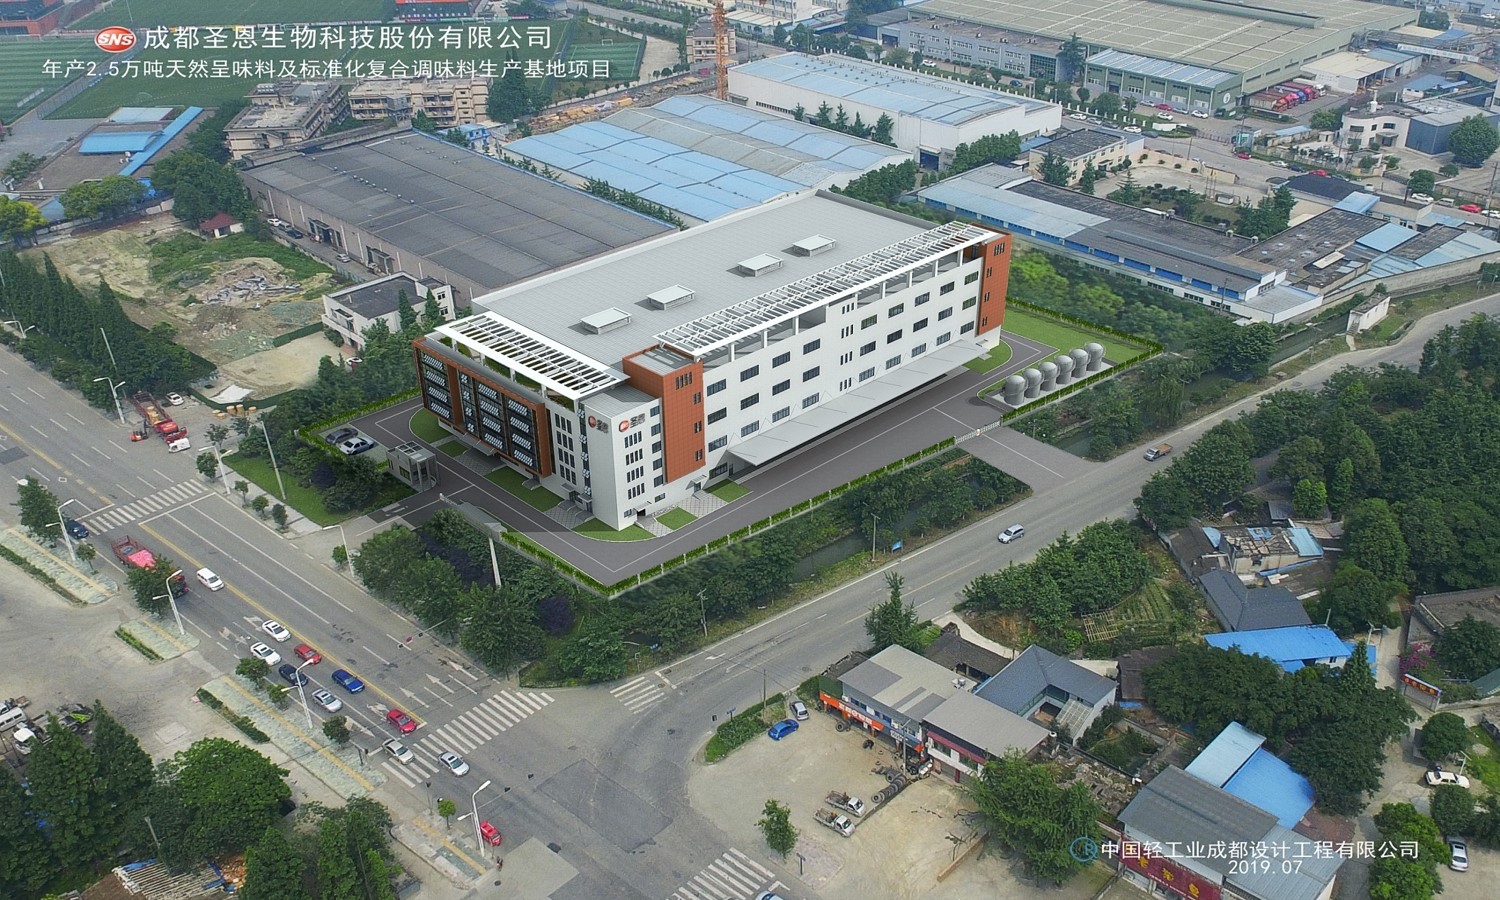 Chengdu SNS Biotechnology Co., Ltd. Natural Flavor and Standardized Compound Seasoning Production Base Project